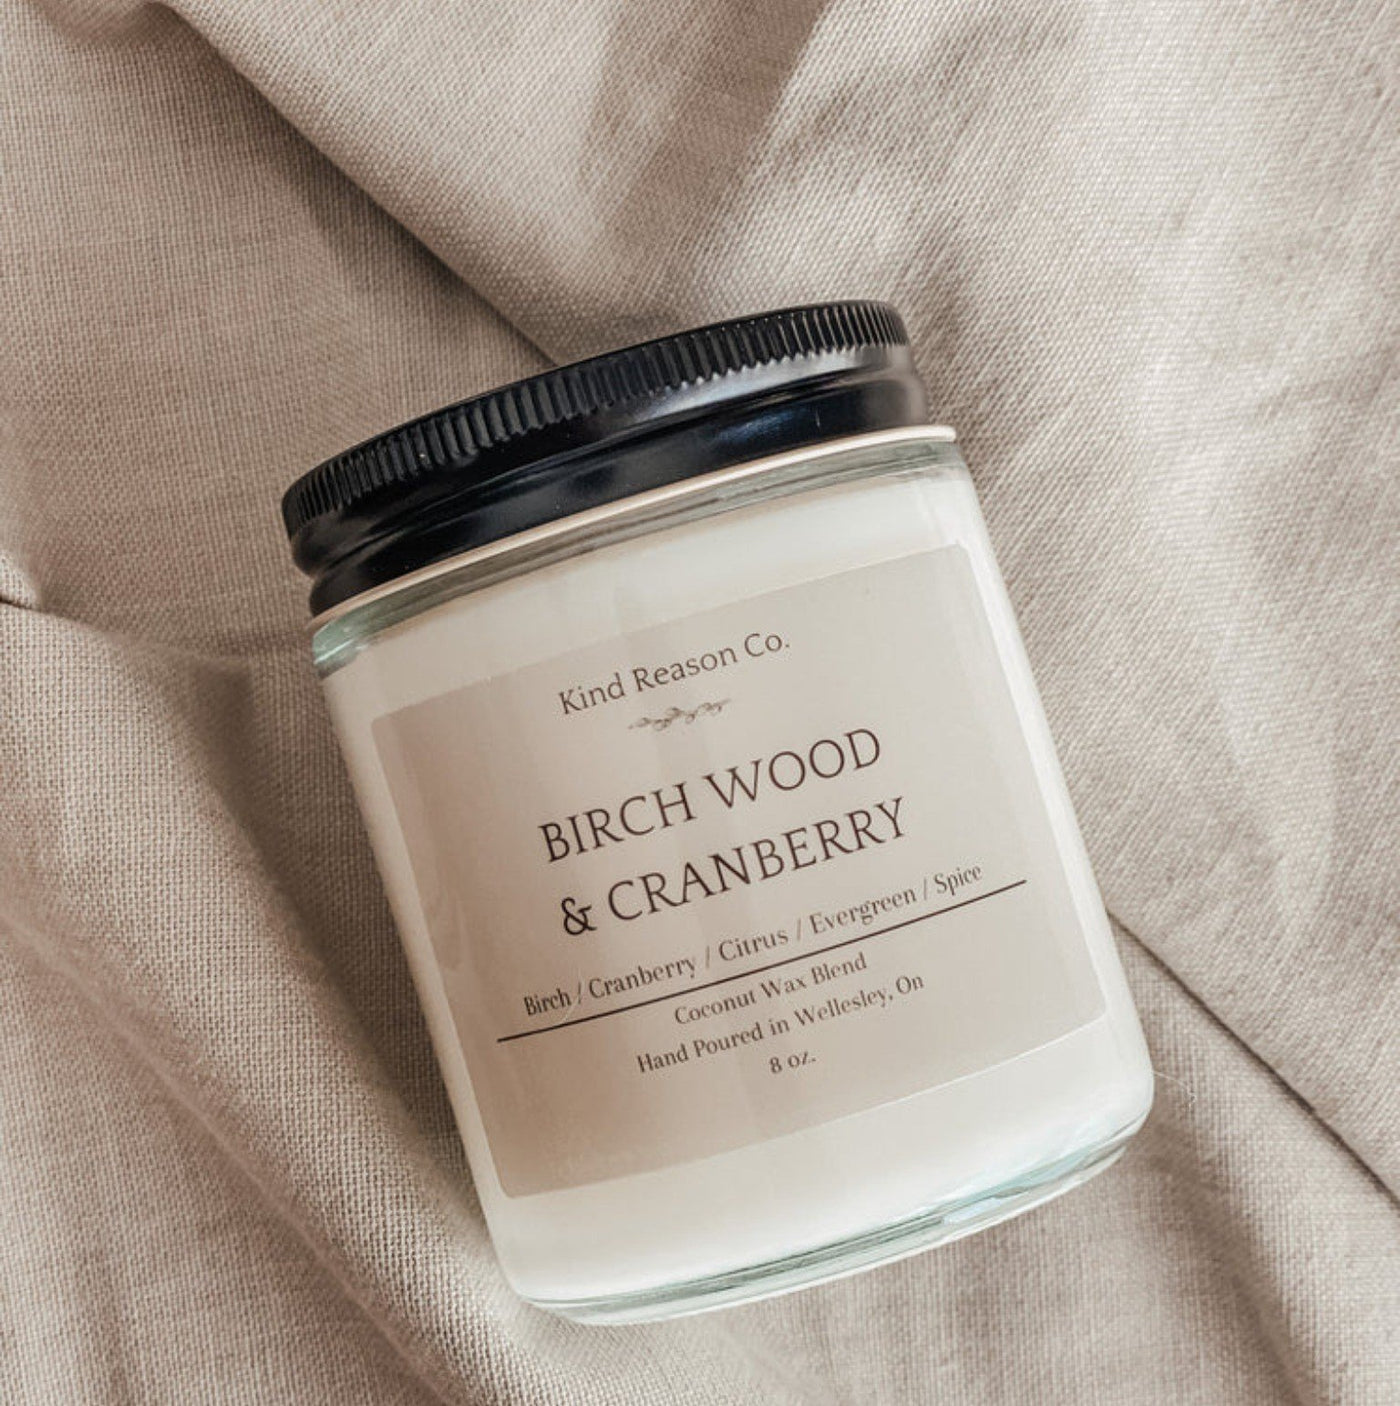 Birchwood Cranberry Candle: Non-Toxic candle by Kind Reason Co. Sizes 8oz and 16oz